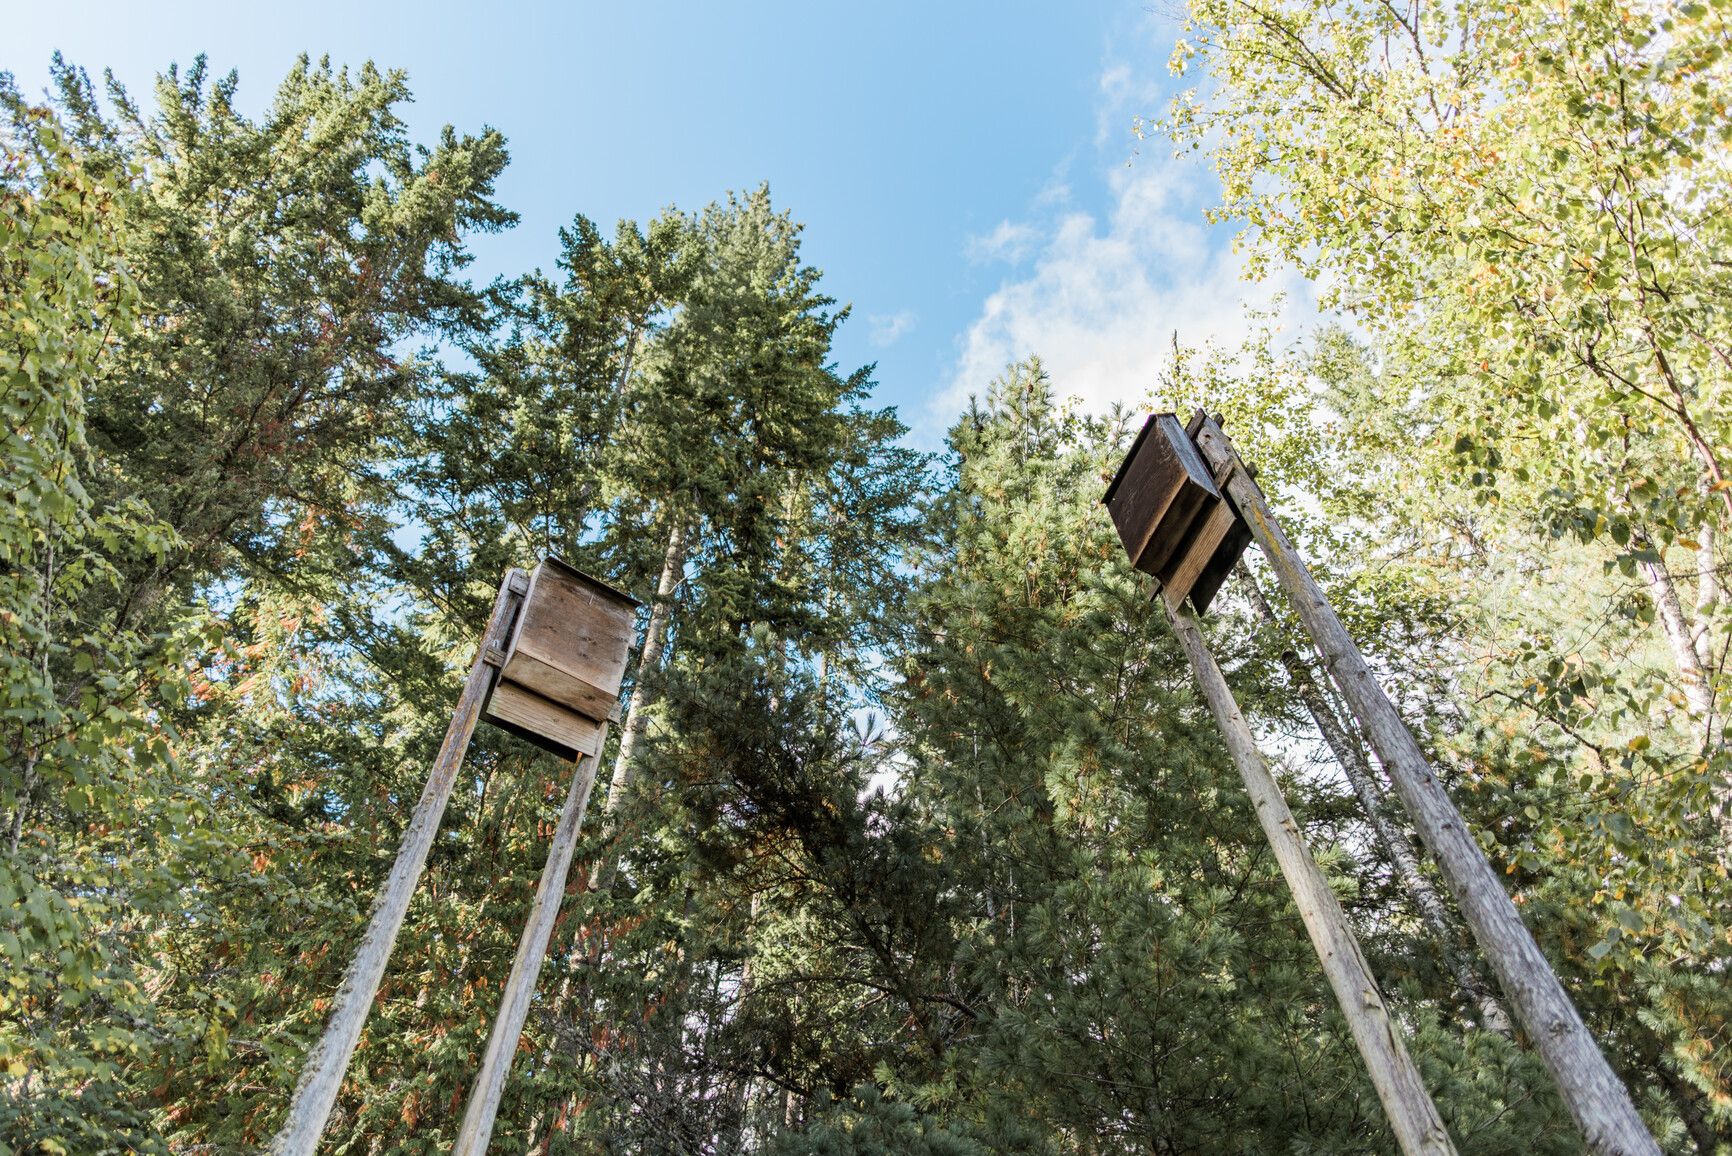 High up on poles are bat boxes in Cinnemousun Narrows Park.